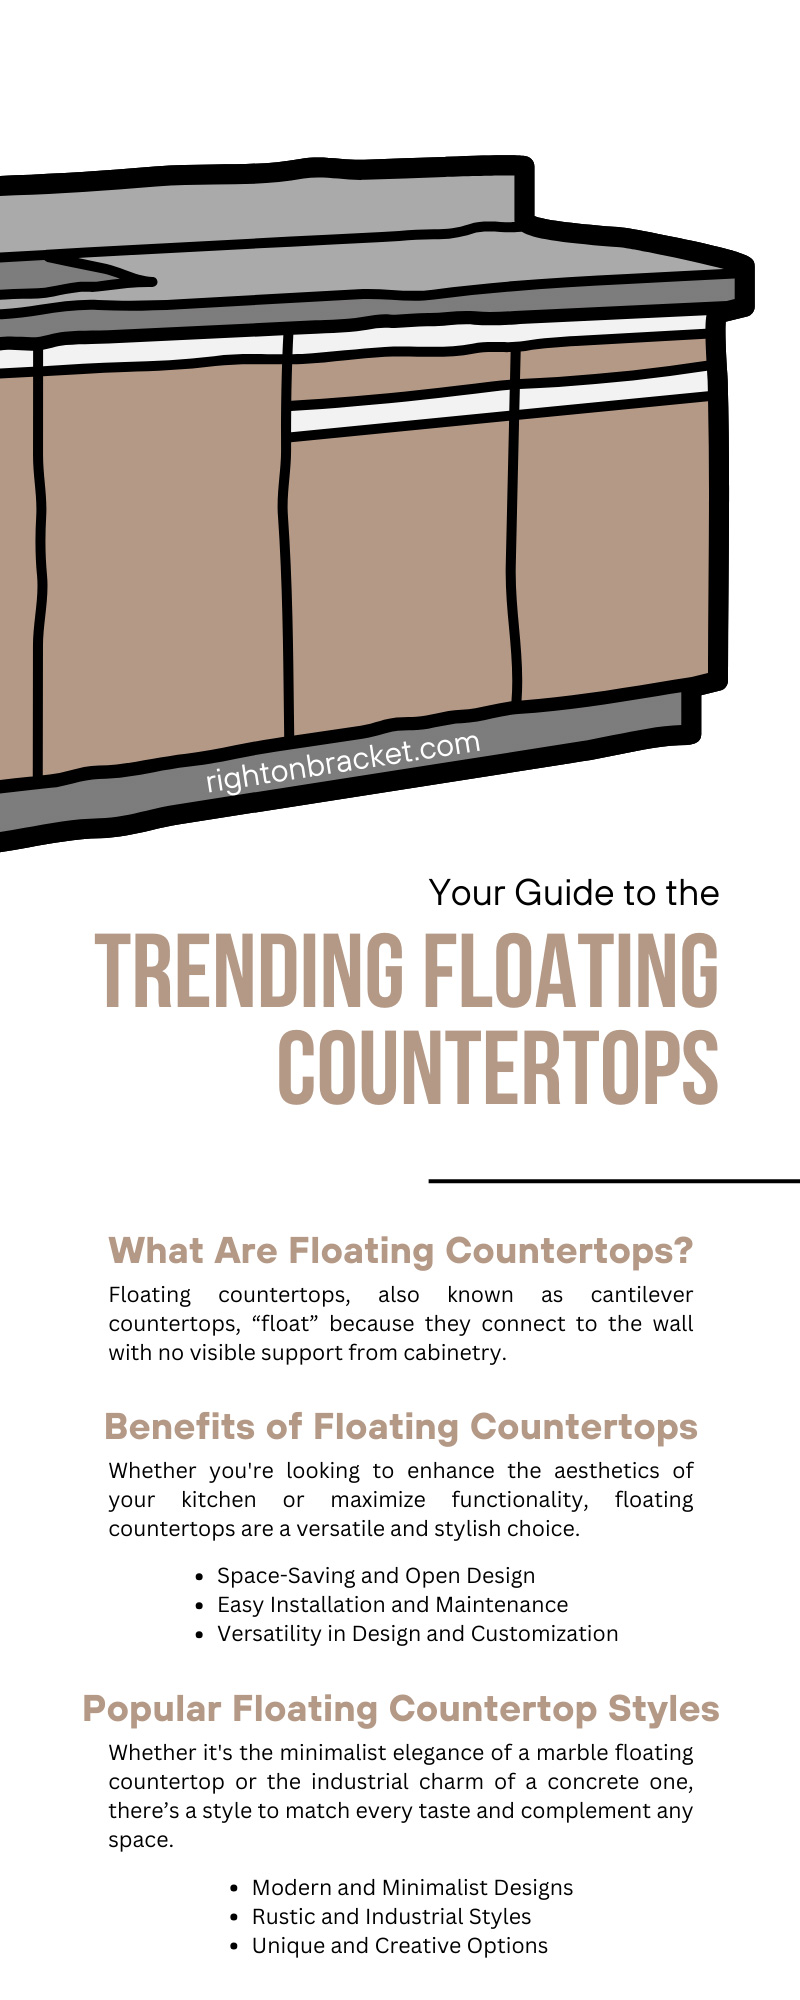 Your Guide to the Trending Floating Countertops
